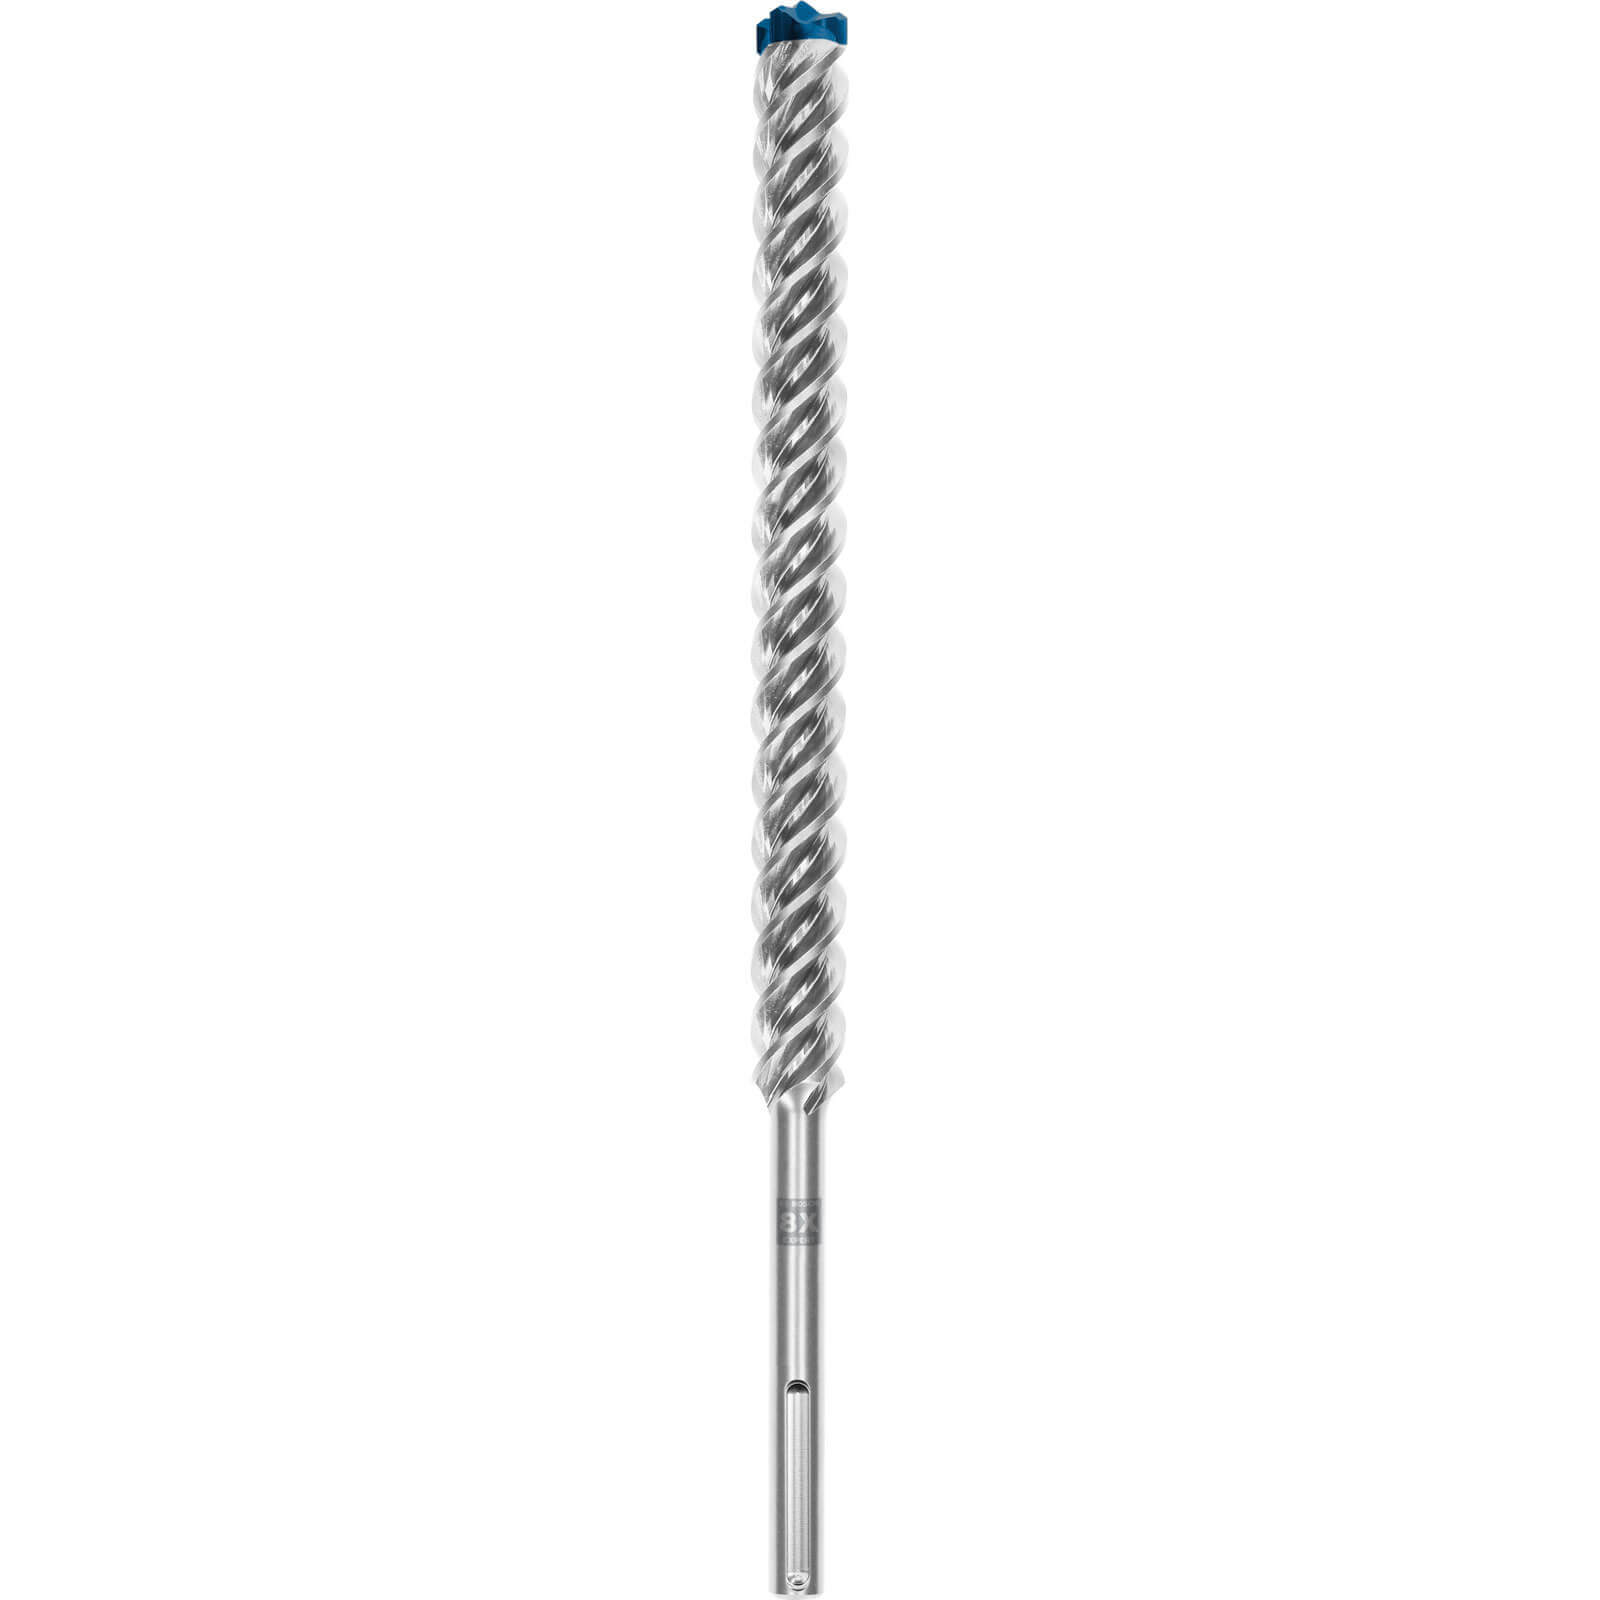 Image of Bosch Expert SDS MAX 8X Concrete 4 Cutter Carbide Head SDS Max Drill Bit 28mm 720mm Pack of 1